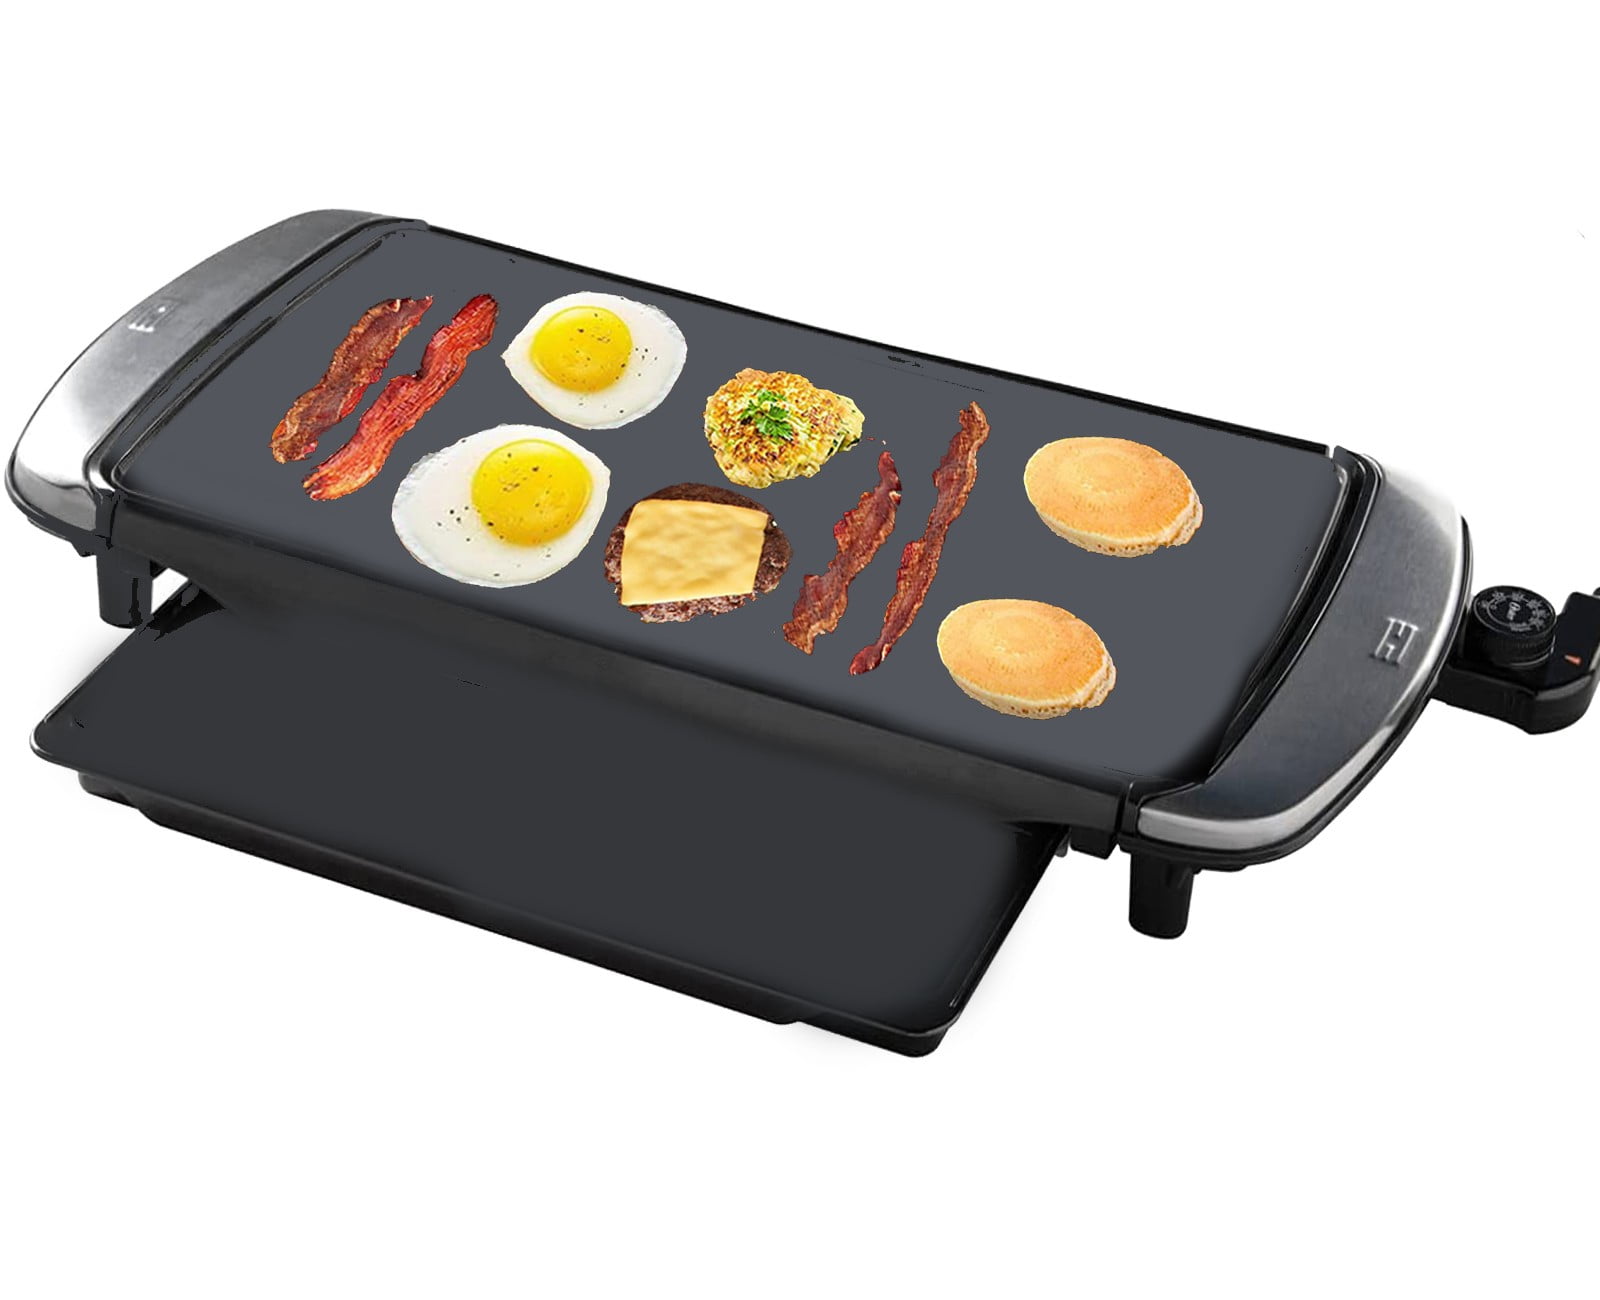 Large Nonstick Electric Griddle Warming Tray for Pancake Breakfast Family - Walmart.com